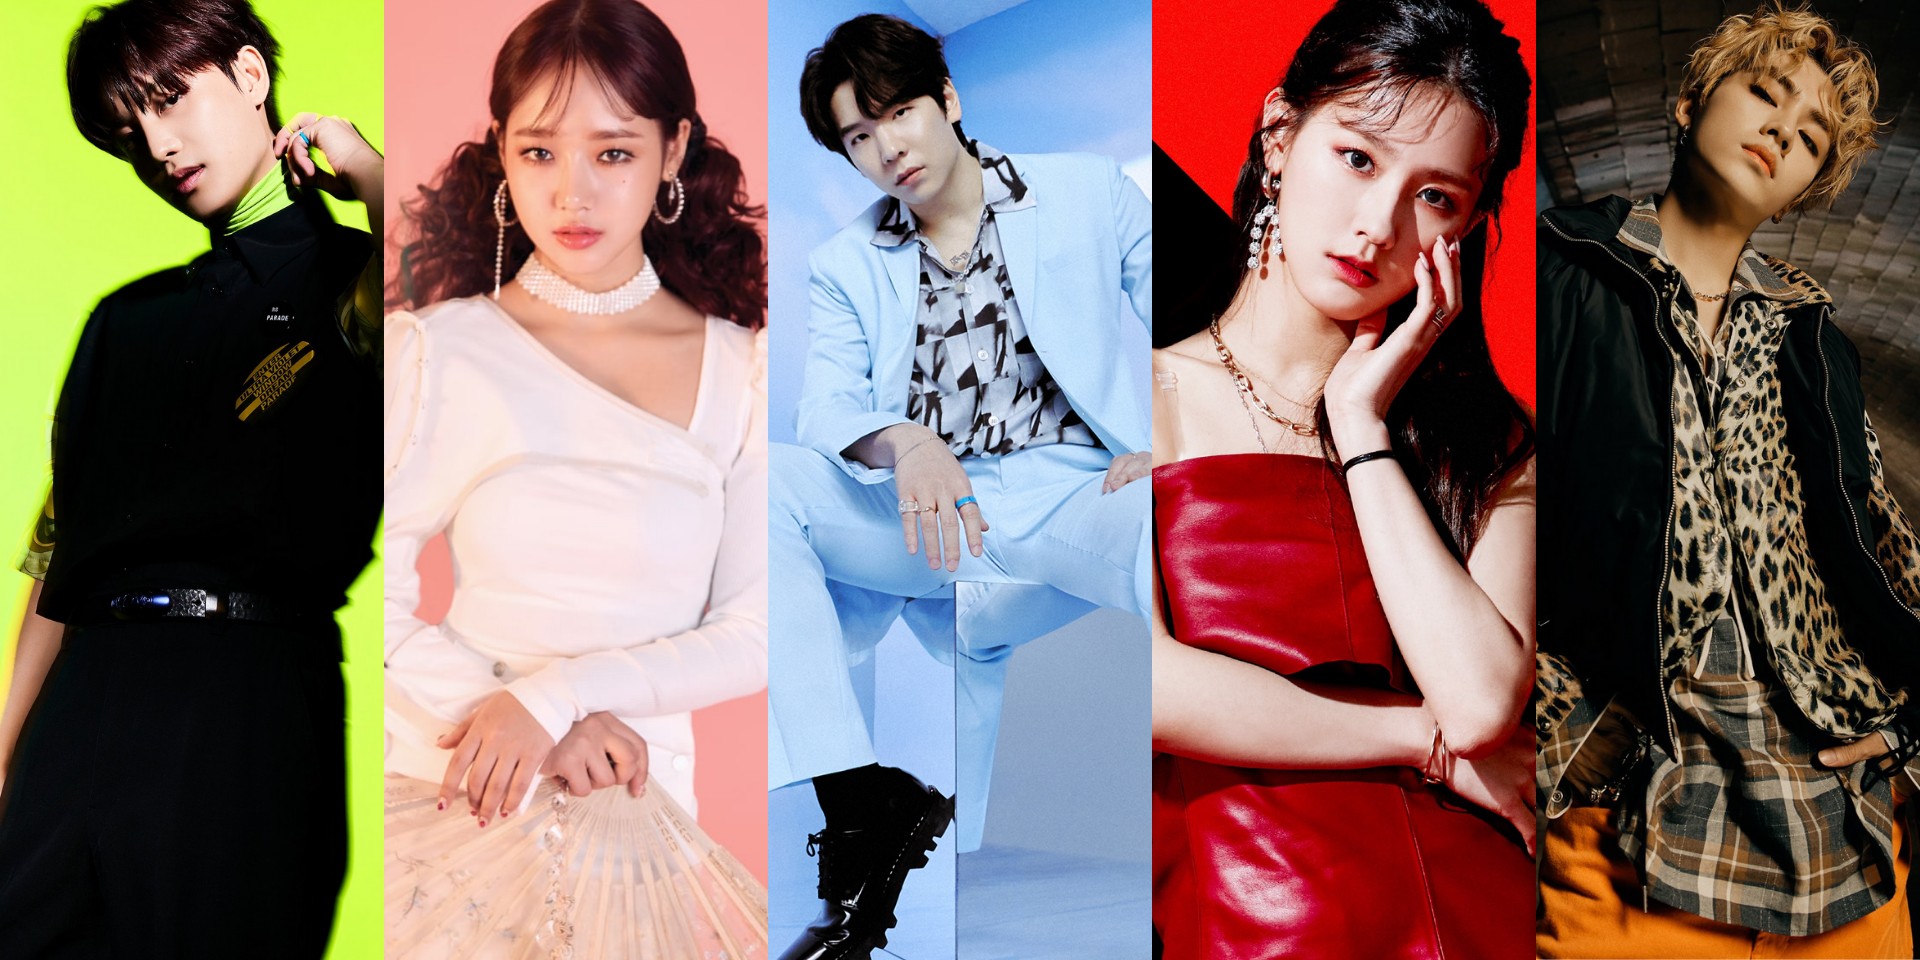 Raiden reveals collaborations with NCT's Taeil, WayV's Xiaojun, (G)I-DLE's Miyeon, WekiMeki's Yoojung, and more for upcoming mini-album